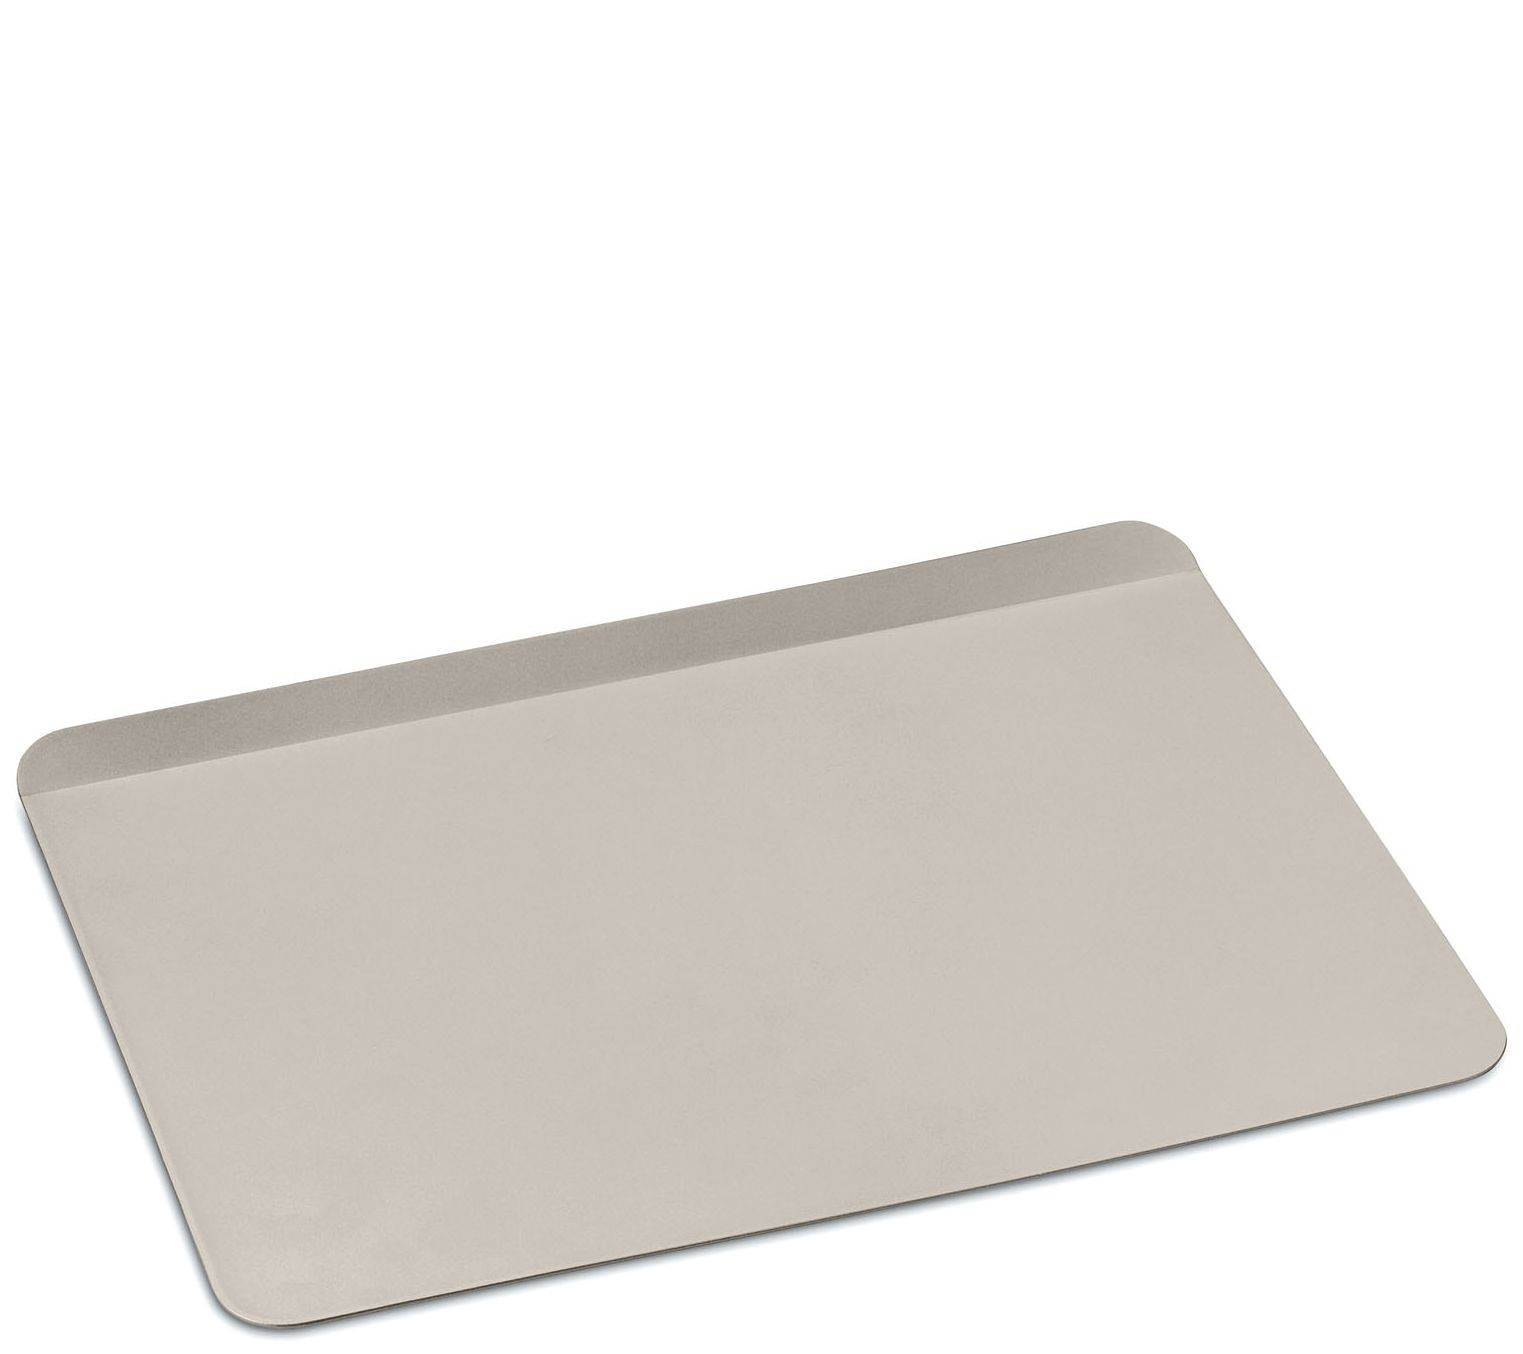 Cuisinart Chef's Classic Nonstick 17 Cookie Sheet - Champagne 